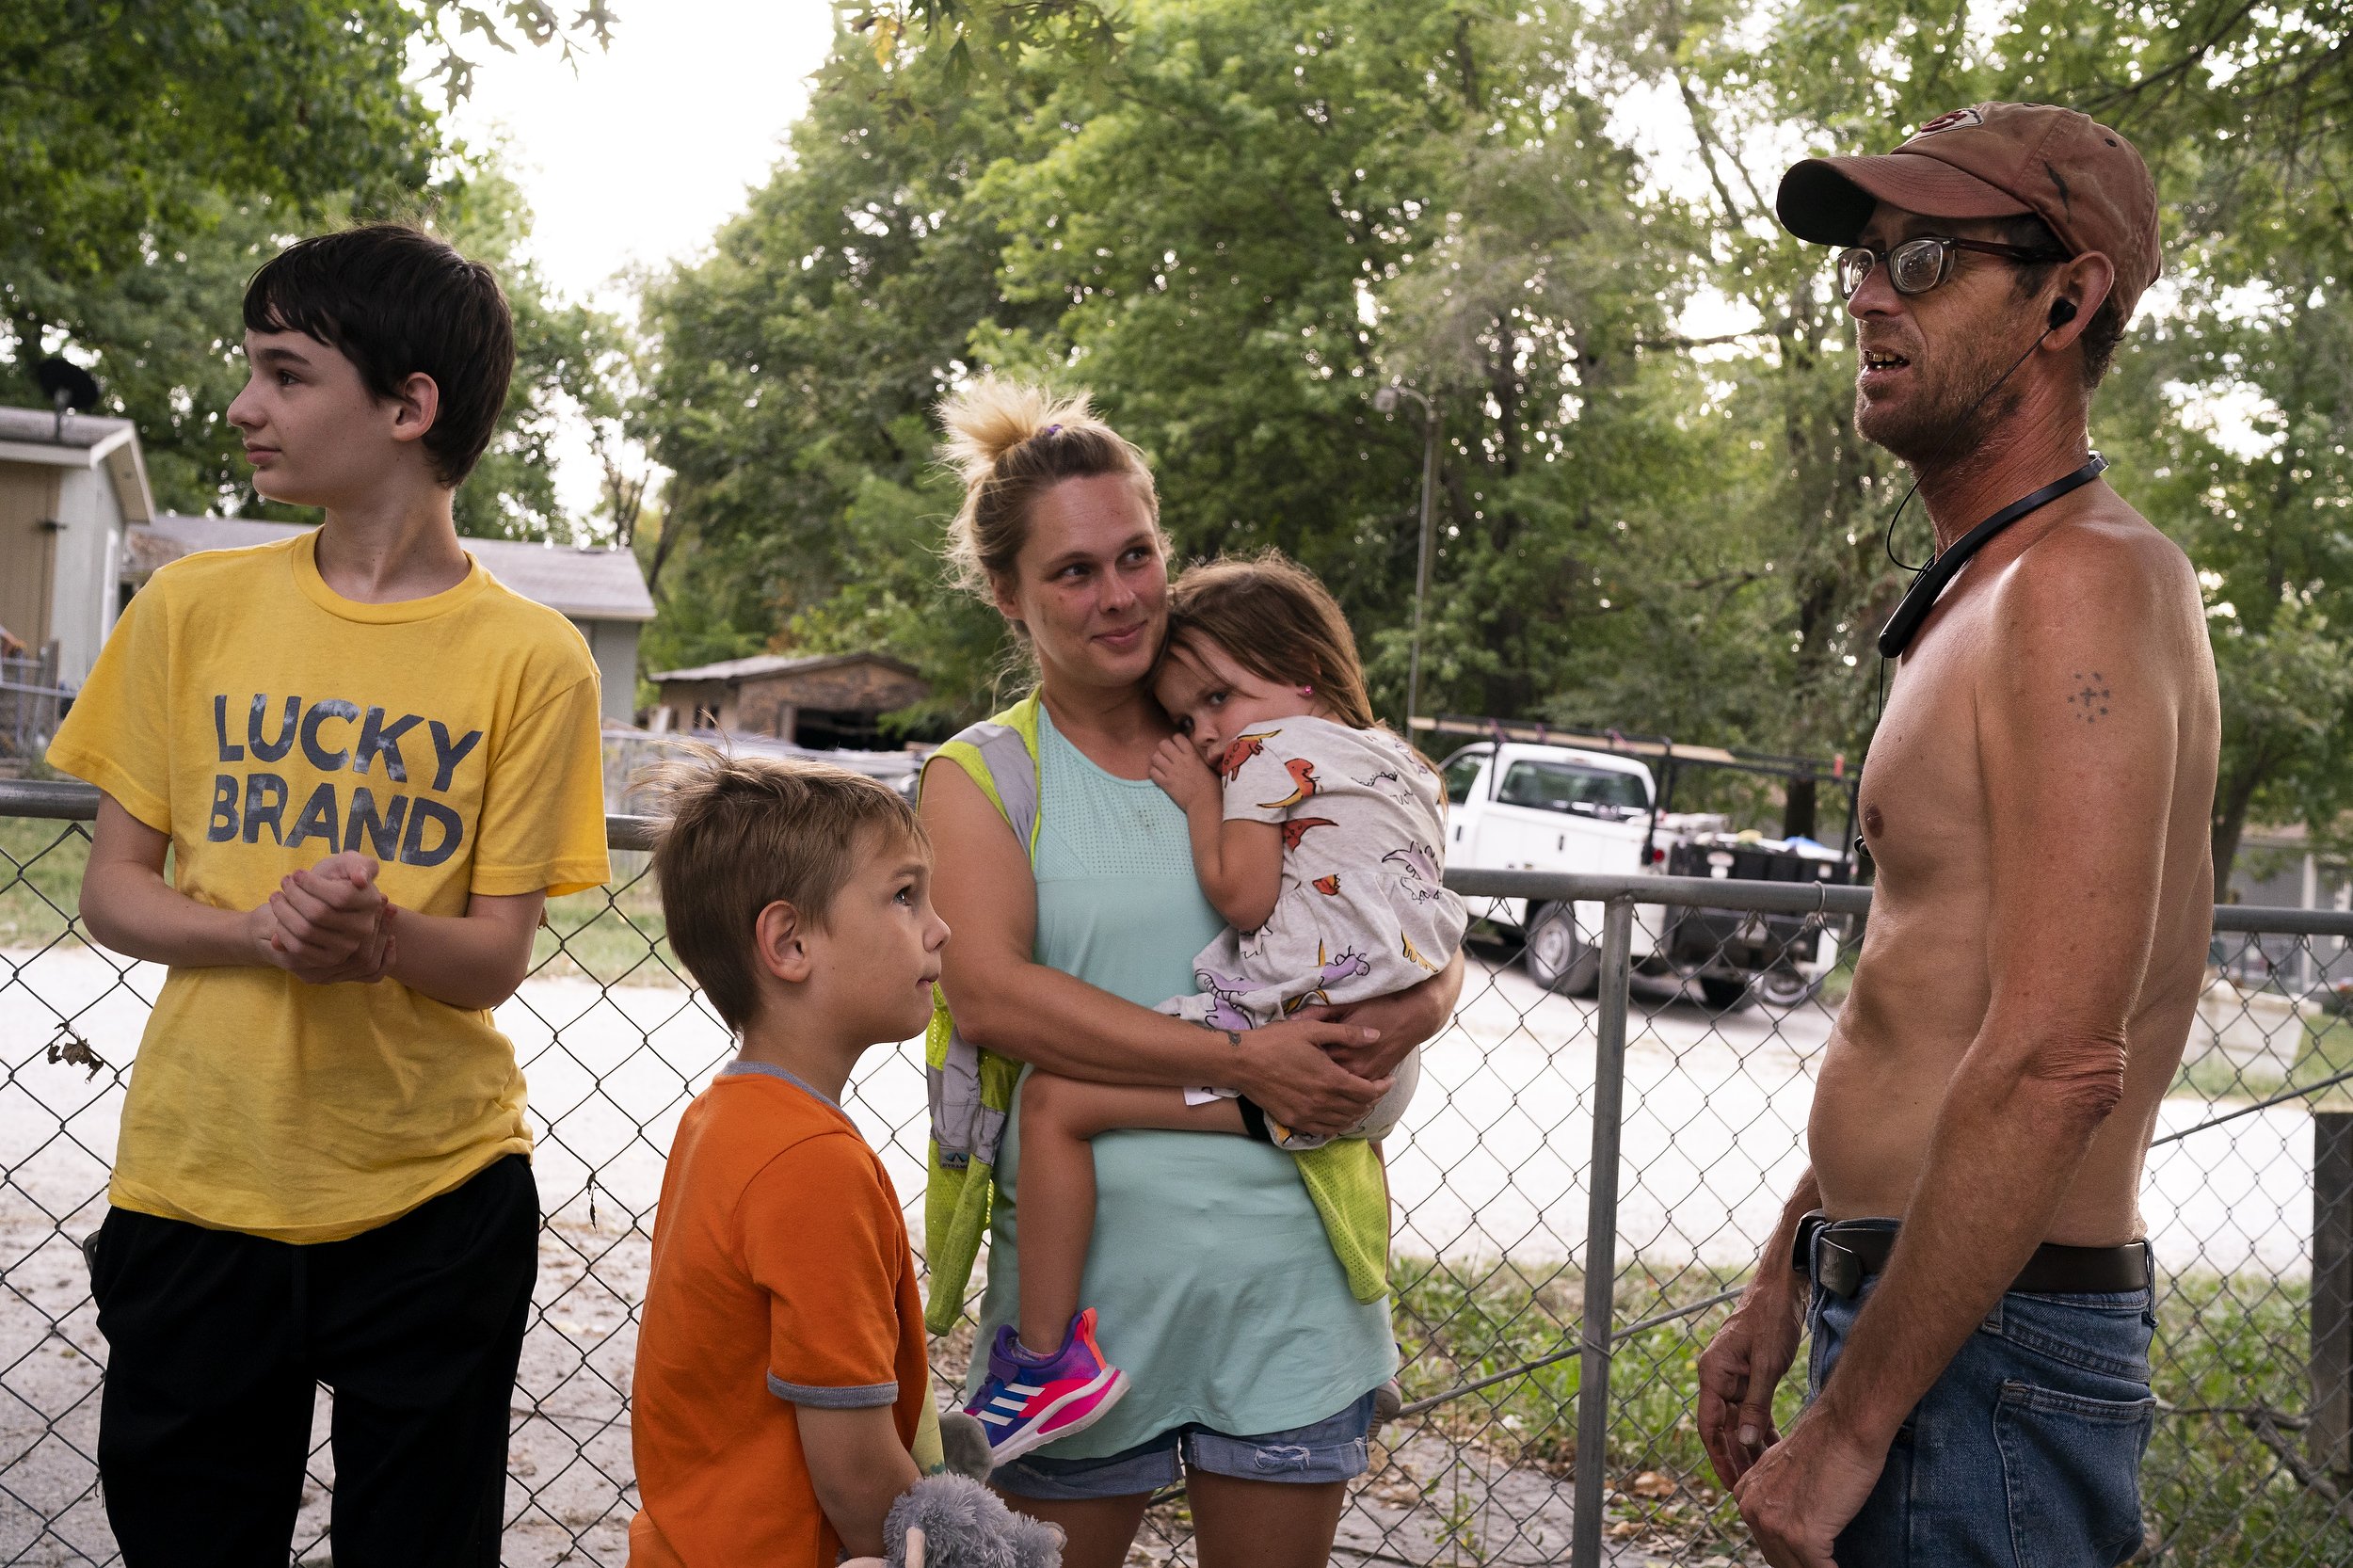  Elizabeth Singleton, center, smiles at her uncle Daryel Franklin Miller, right, during a visit to her grandfather Daryel Miller's house after work with her children Cameron, 12, left, Landon, 7, center left, and Nora, 4, center, on Wednesday, Septem